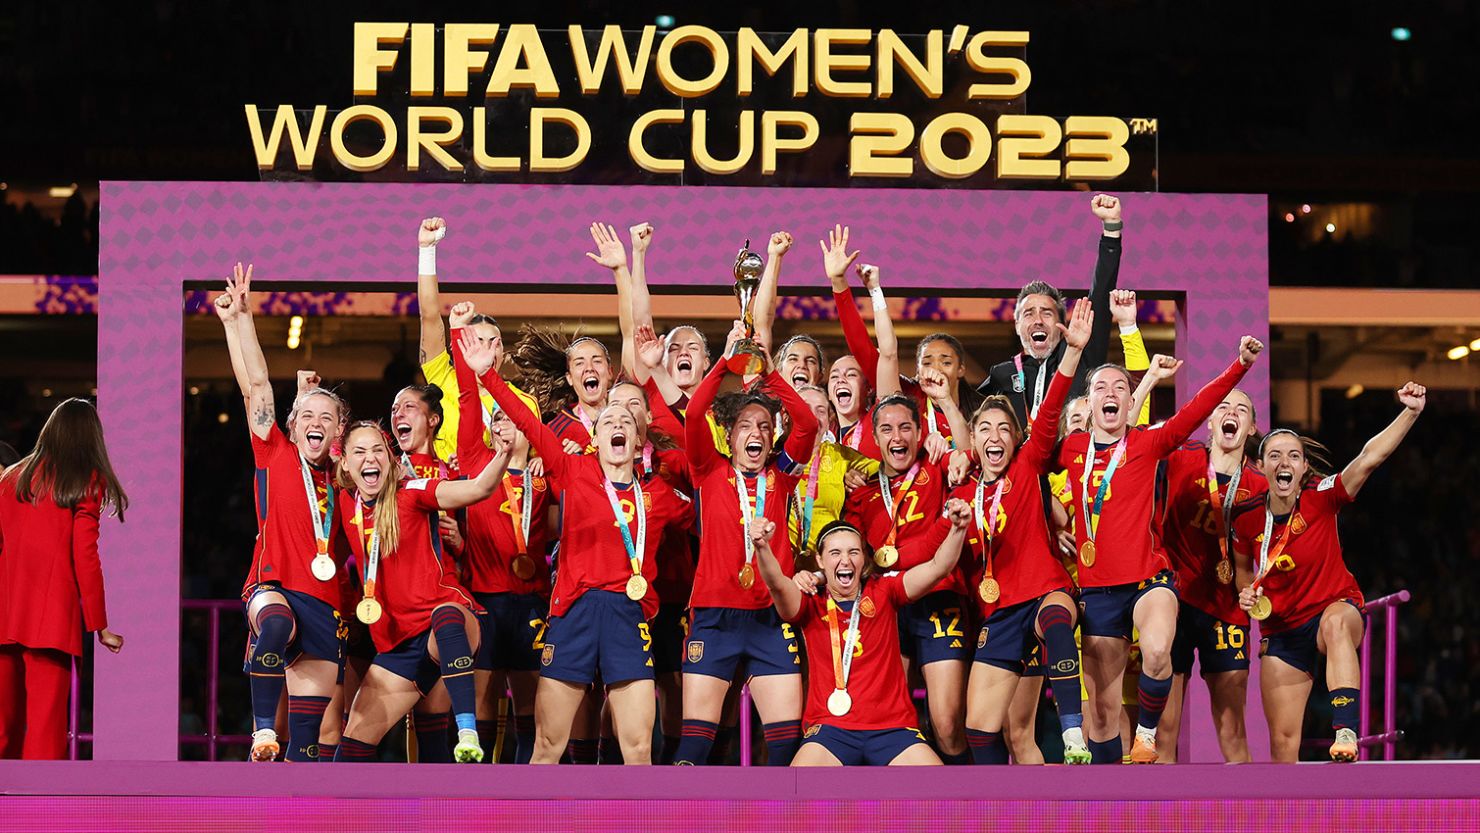 Elite women's sports tipped to generate over $1.2 billion next